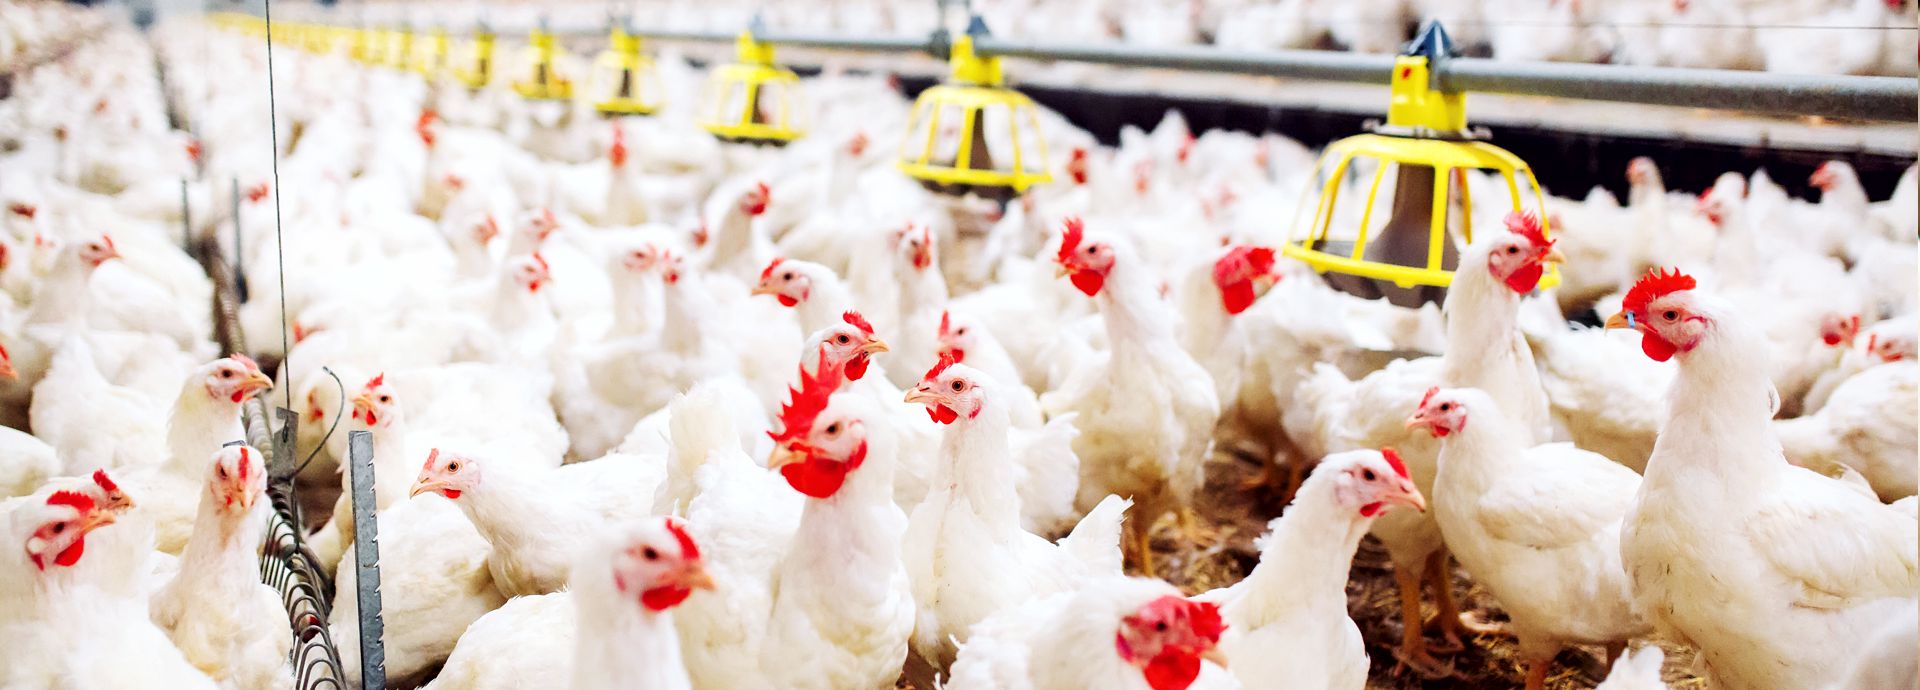 Poultry Industry Canada